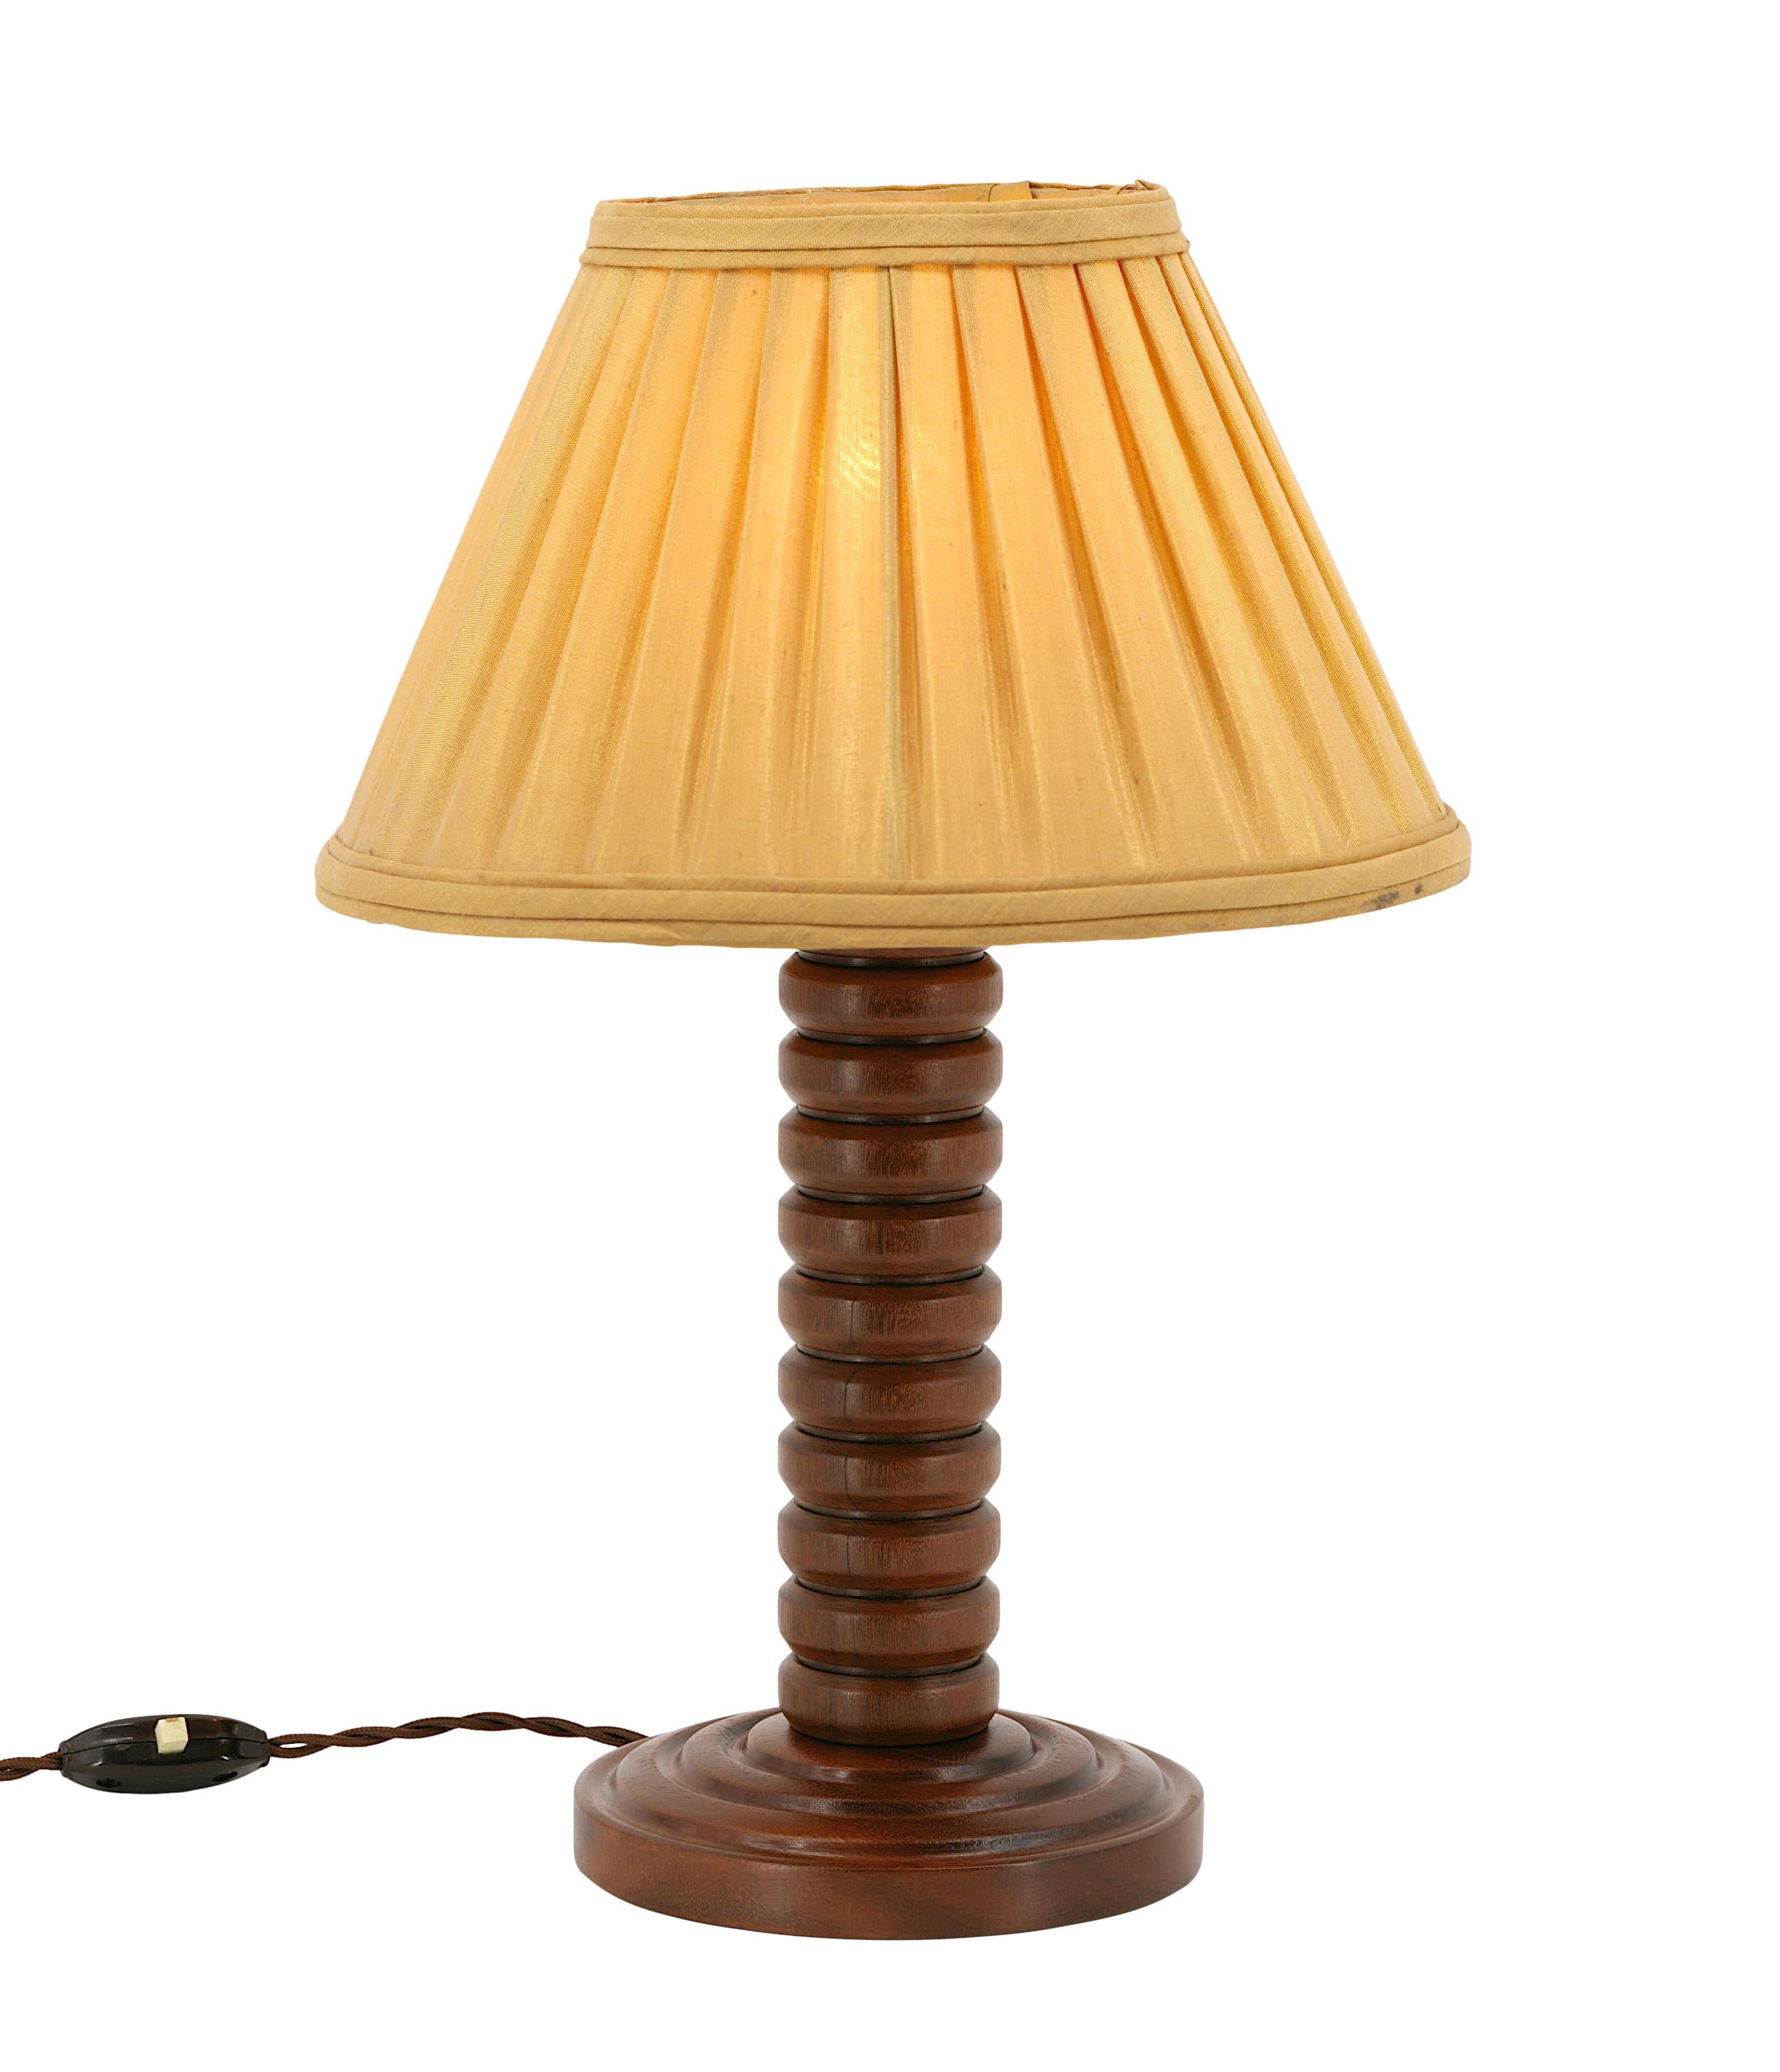 French Art Deco Wooden Table Lamp by Bouchard, 1930s For Sale 1